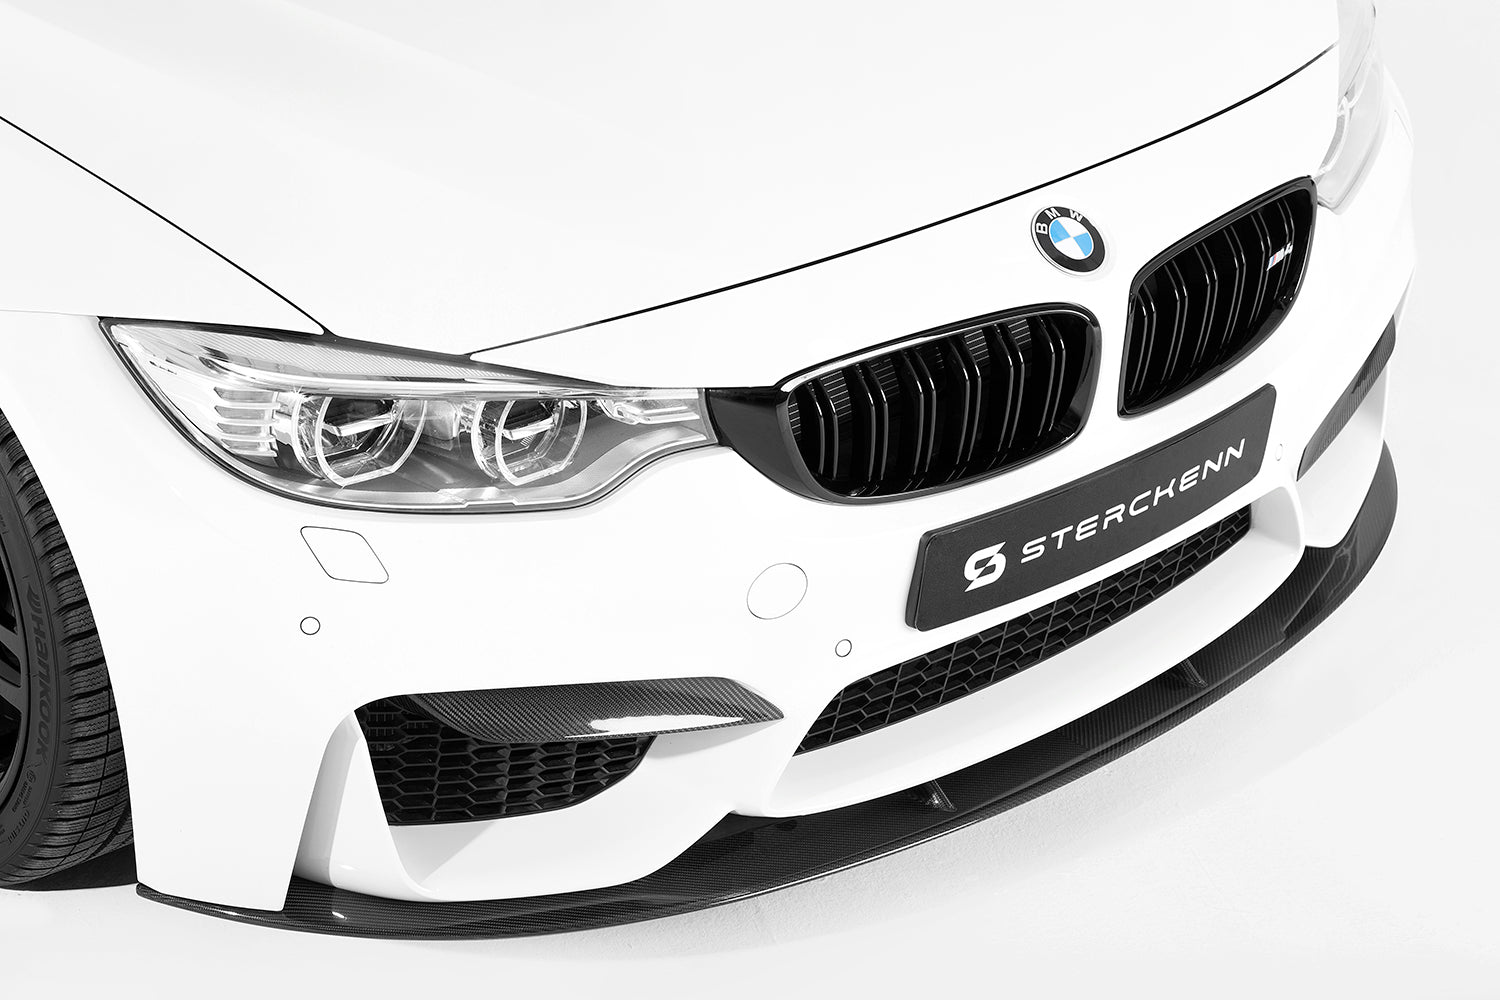 close-up on the front of the white bmw with the sterckenn logo